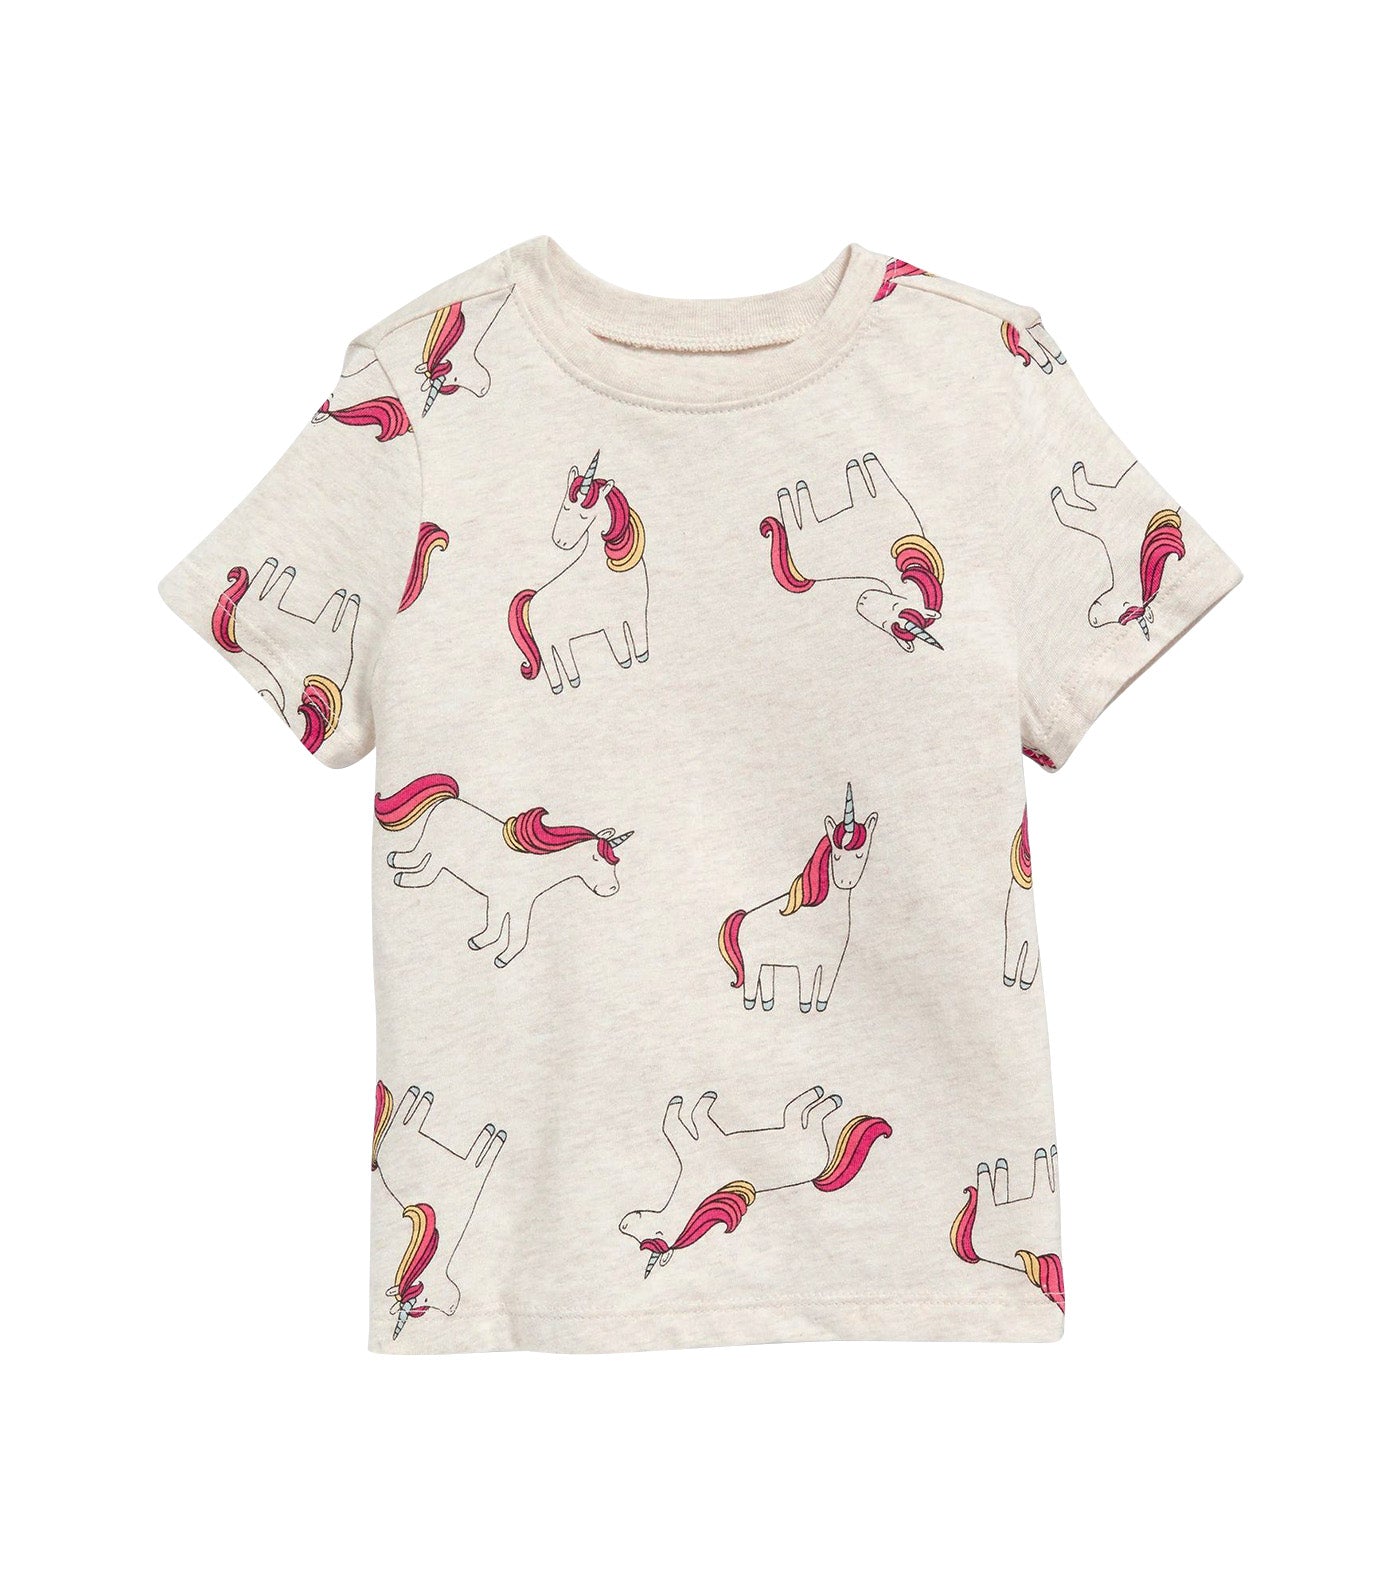 Unisex Printed Crew-Neck T-Shirt for Toddler - Oatmeal Heather